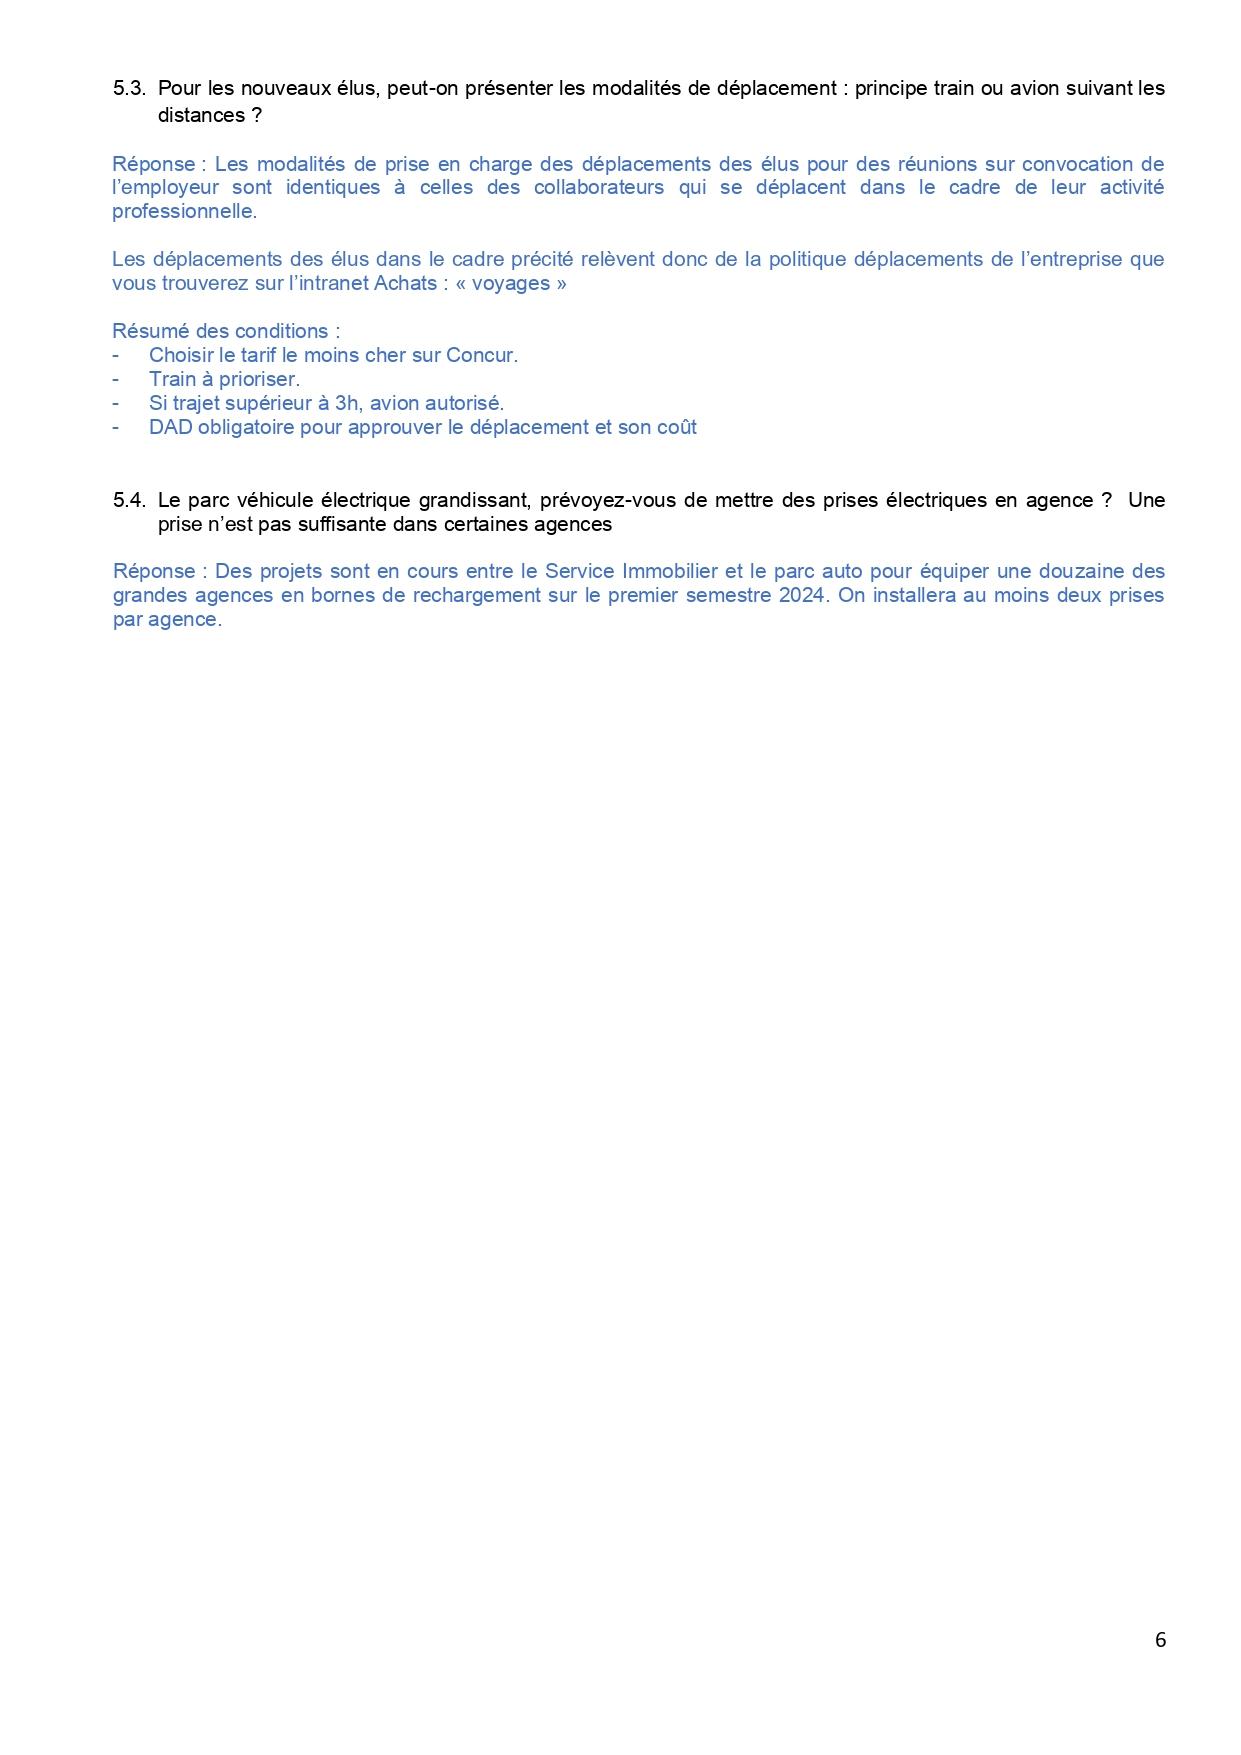 Reponses aux questions du cse 21 03 24 vdef pages to jpg 0006